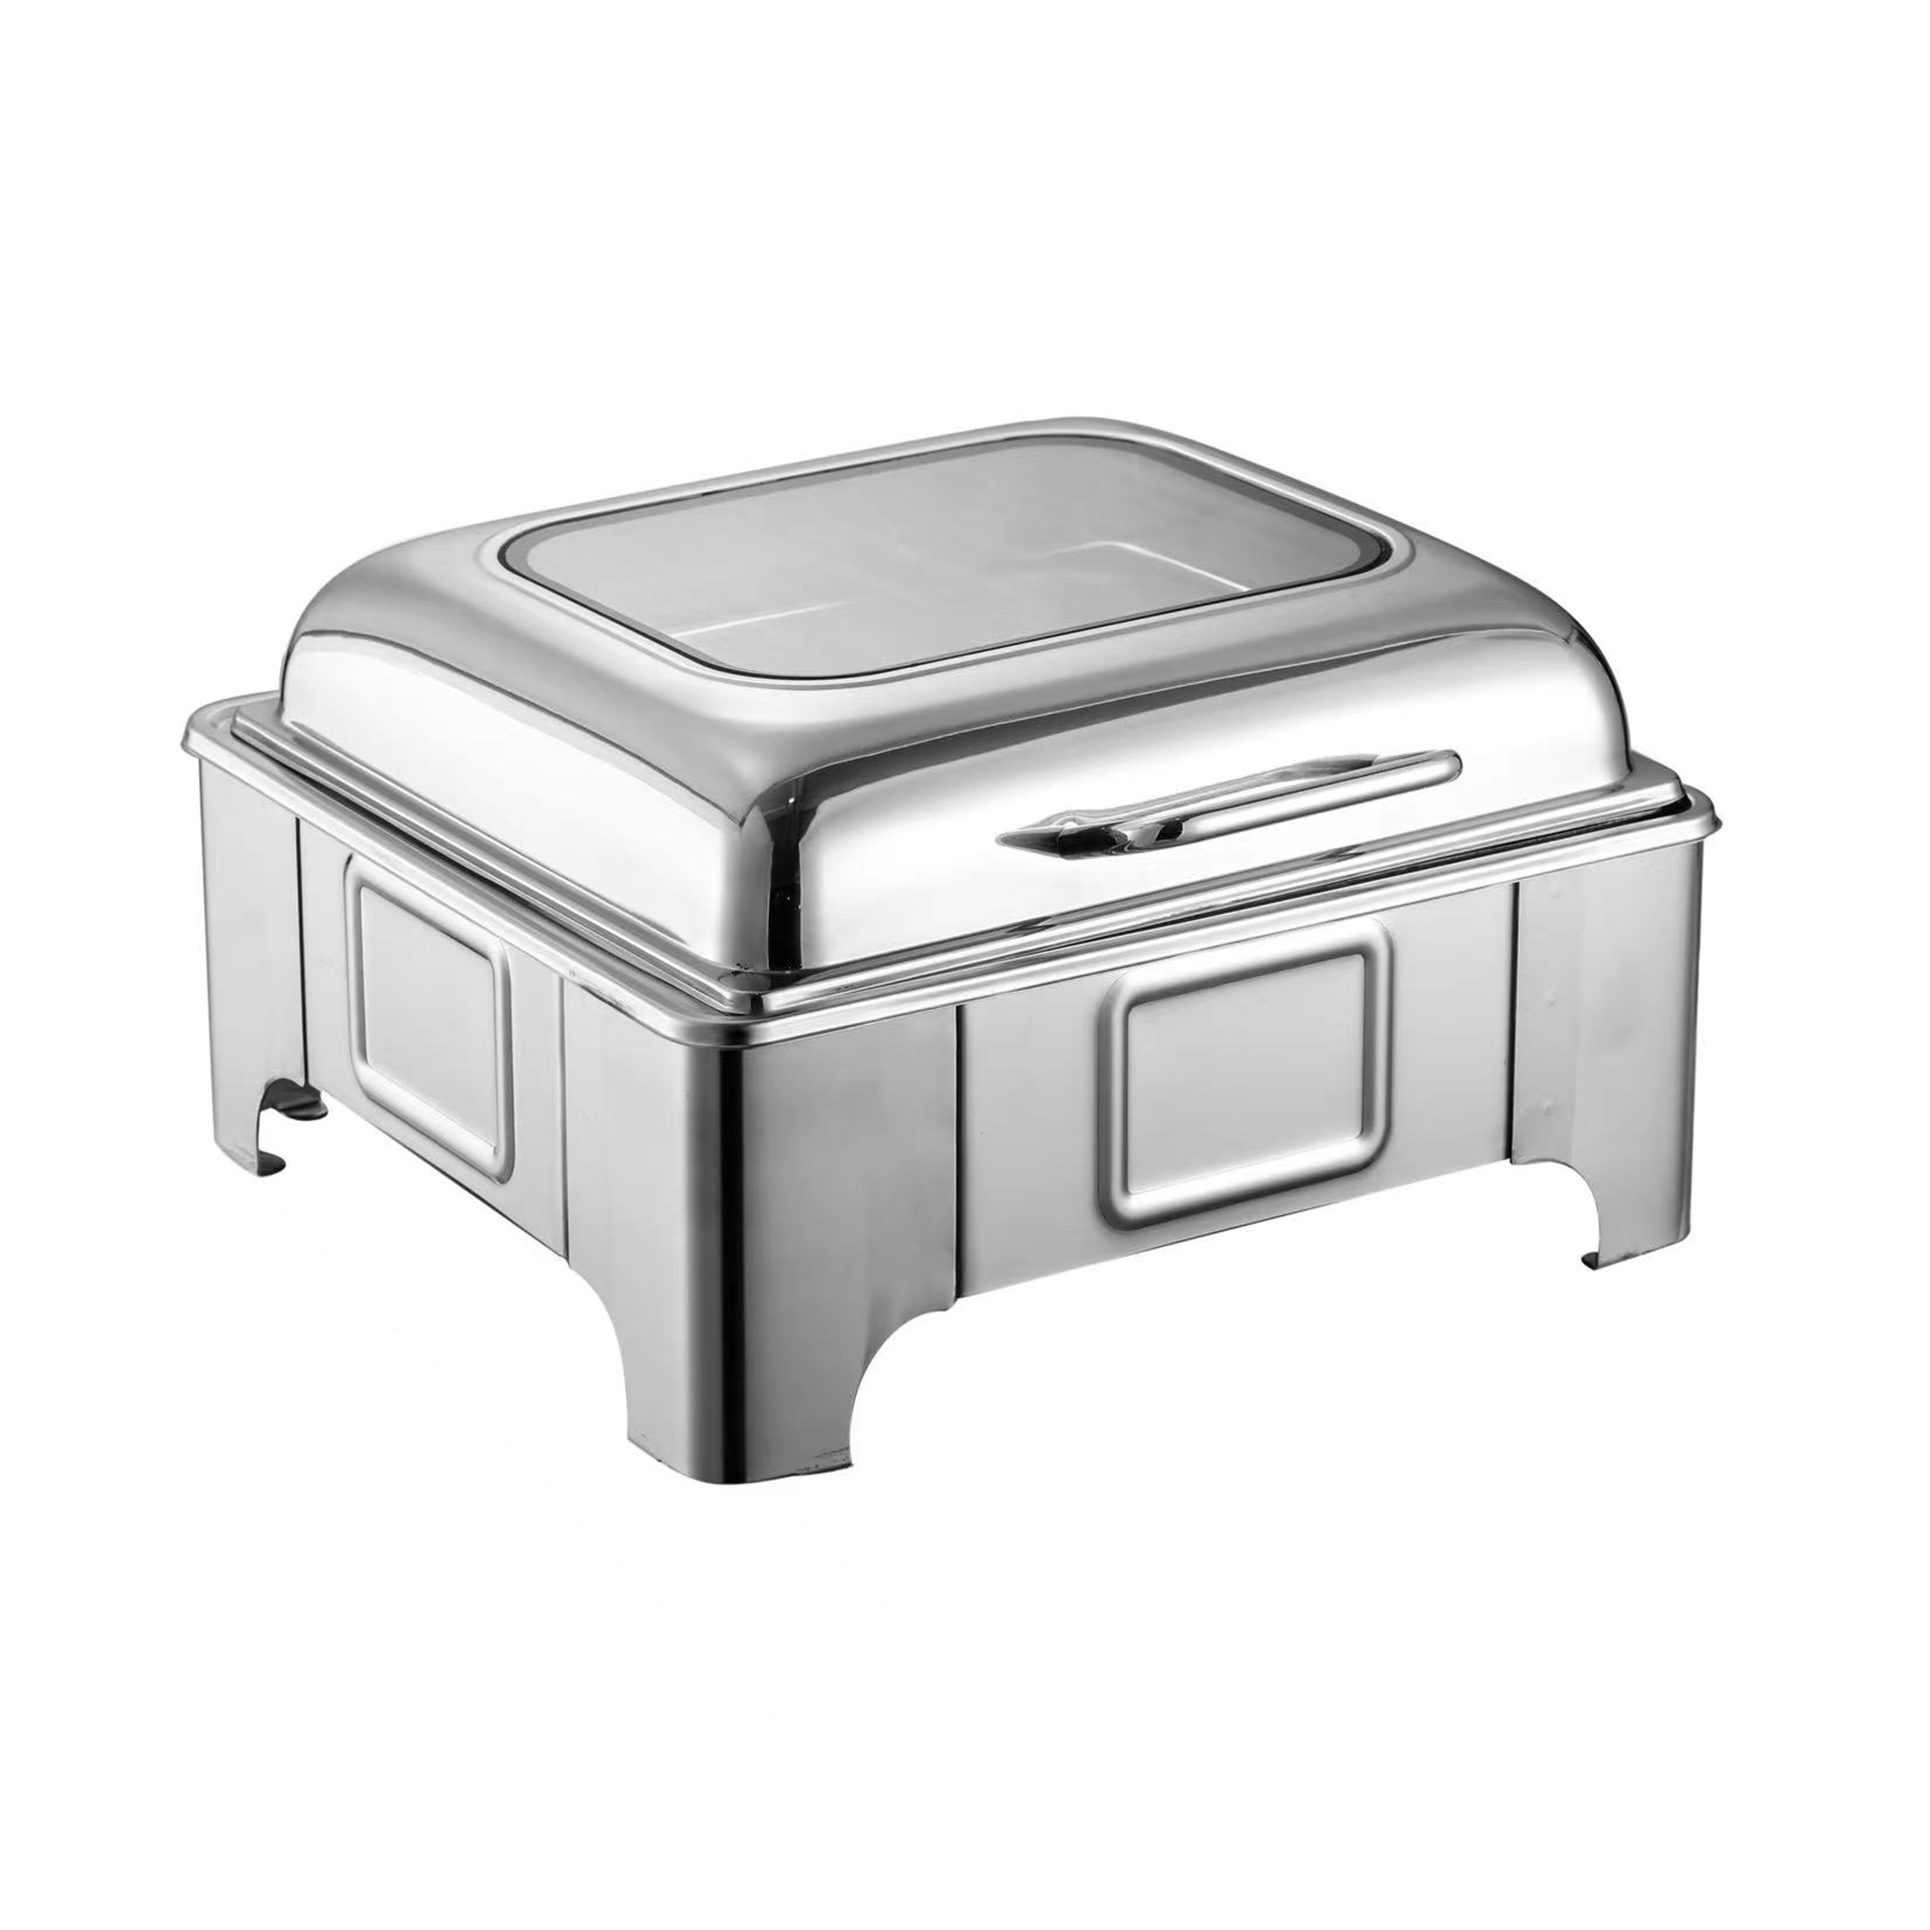 South Base Simple Chafer/Chafing Dishes 322L - South Base